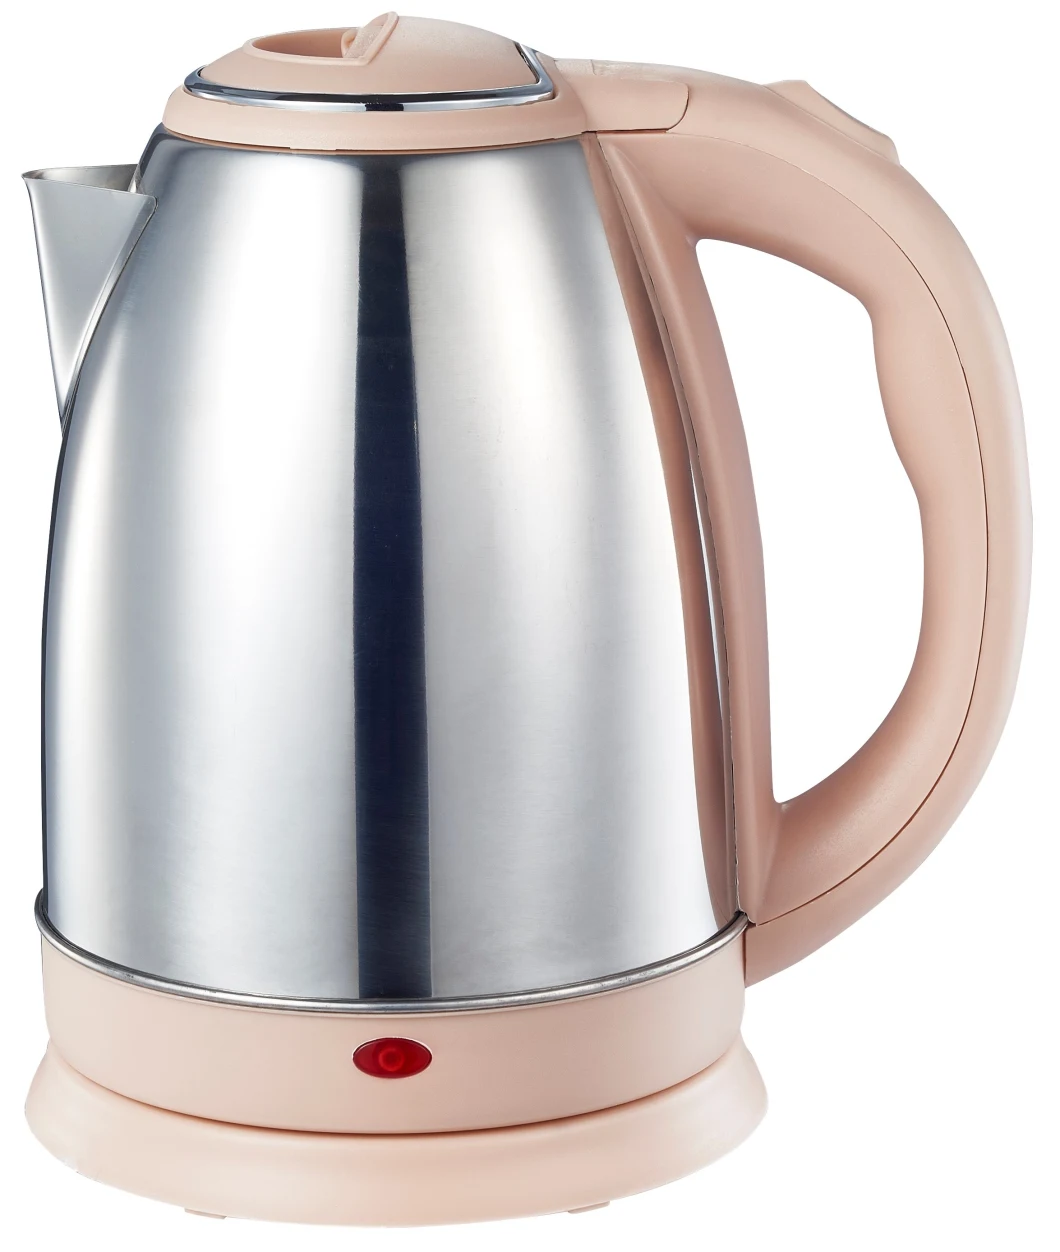 Home Appliances Boil Water Fast Multi-Color Fast Heating 1.8L Stainless Steel Electric Kettle